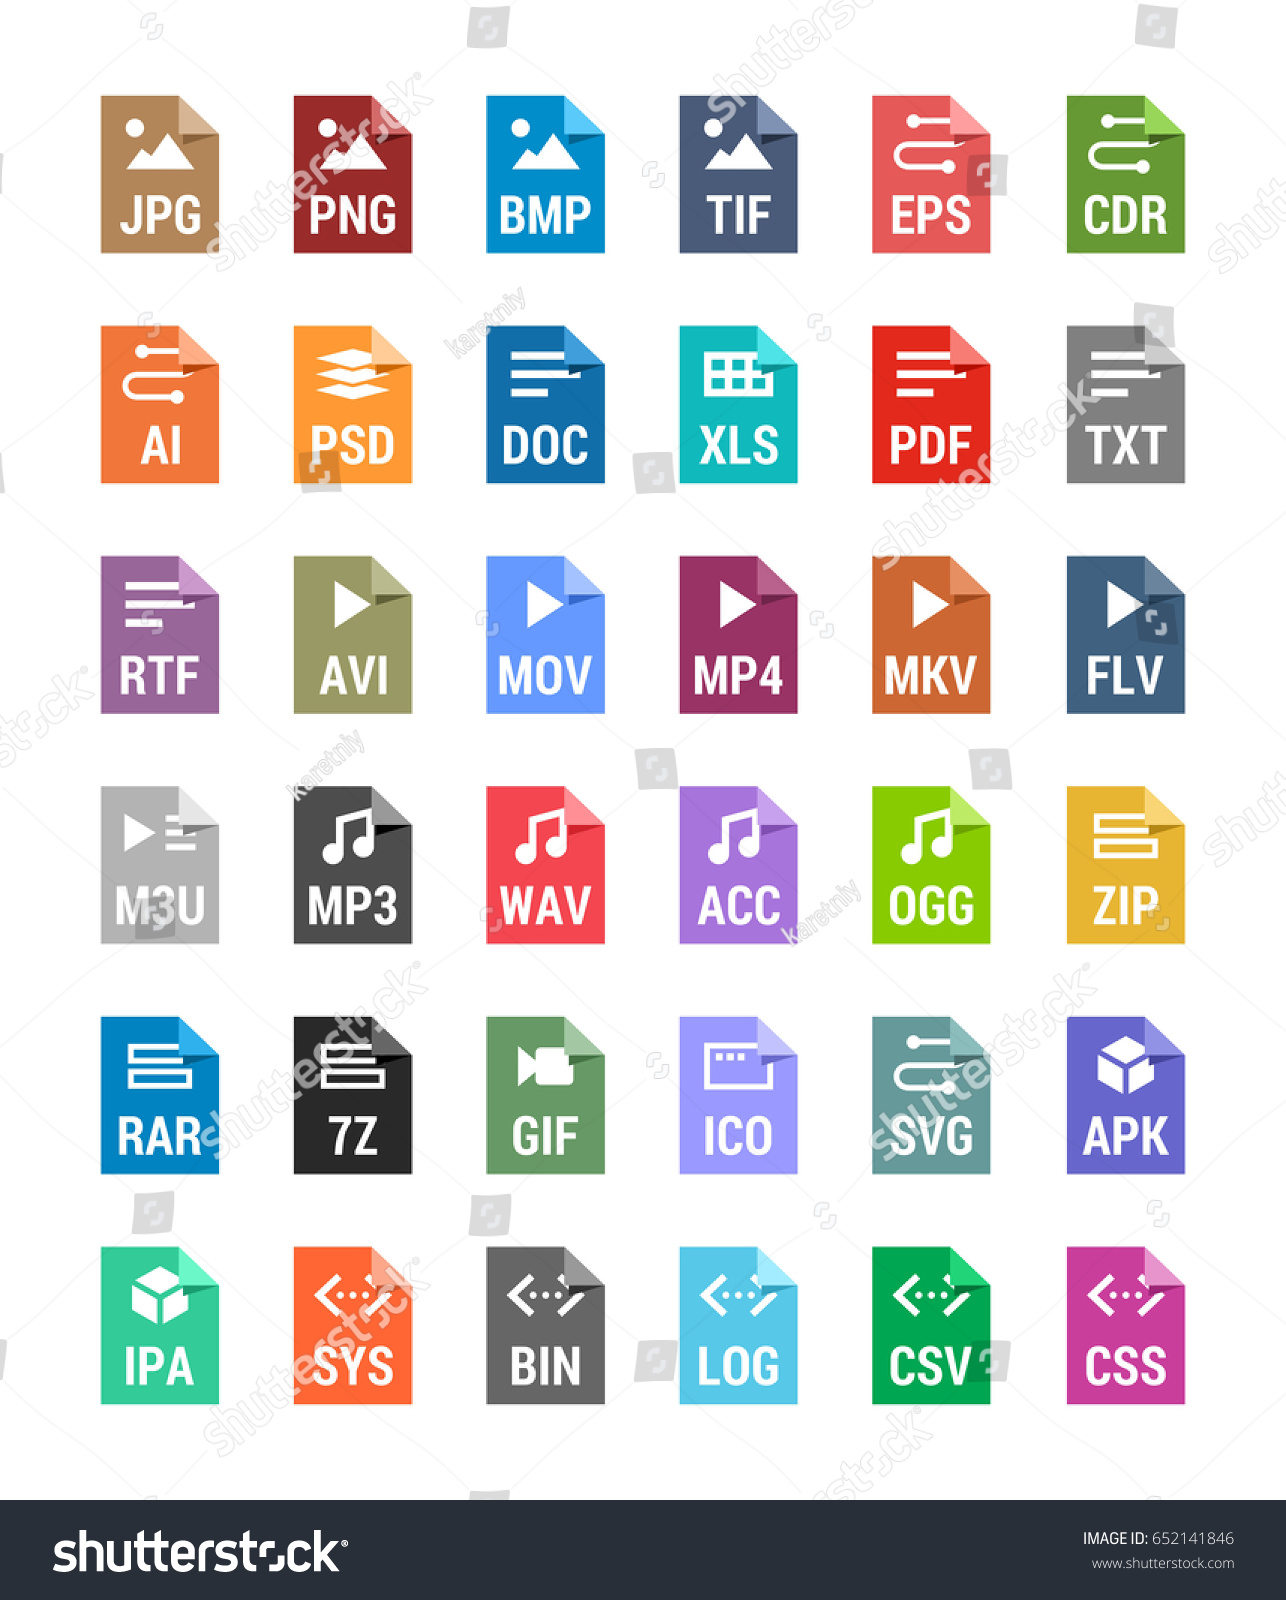 SVG of Flat file types icons. Archive, vector, audio, image, system, document formats svg